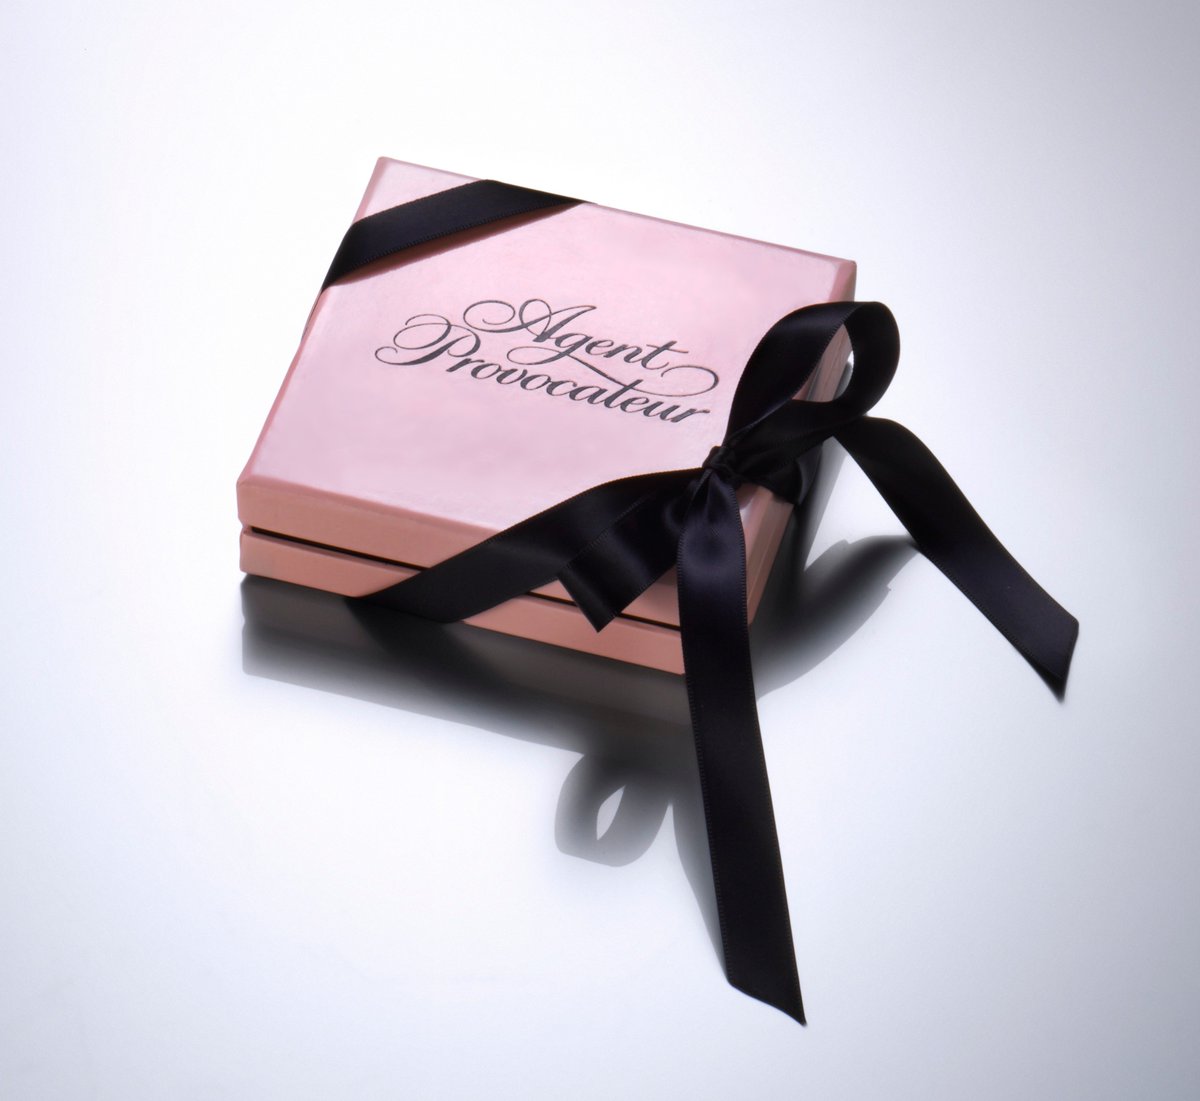 Agent Provocateur on Twitter: "Take the guesswork out of gift giving and let her choose the lingerie she loves an #AgentProvocateur Gift Card https://t.co/PWI9G4n5ib. https://t.co/dPCqMYS1os" / Twitter